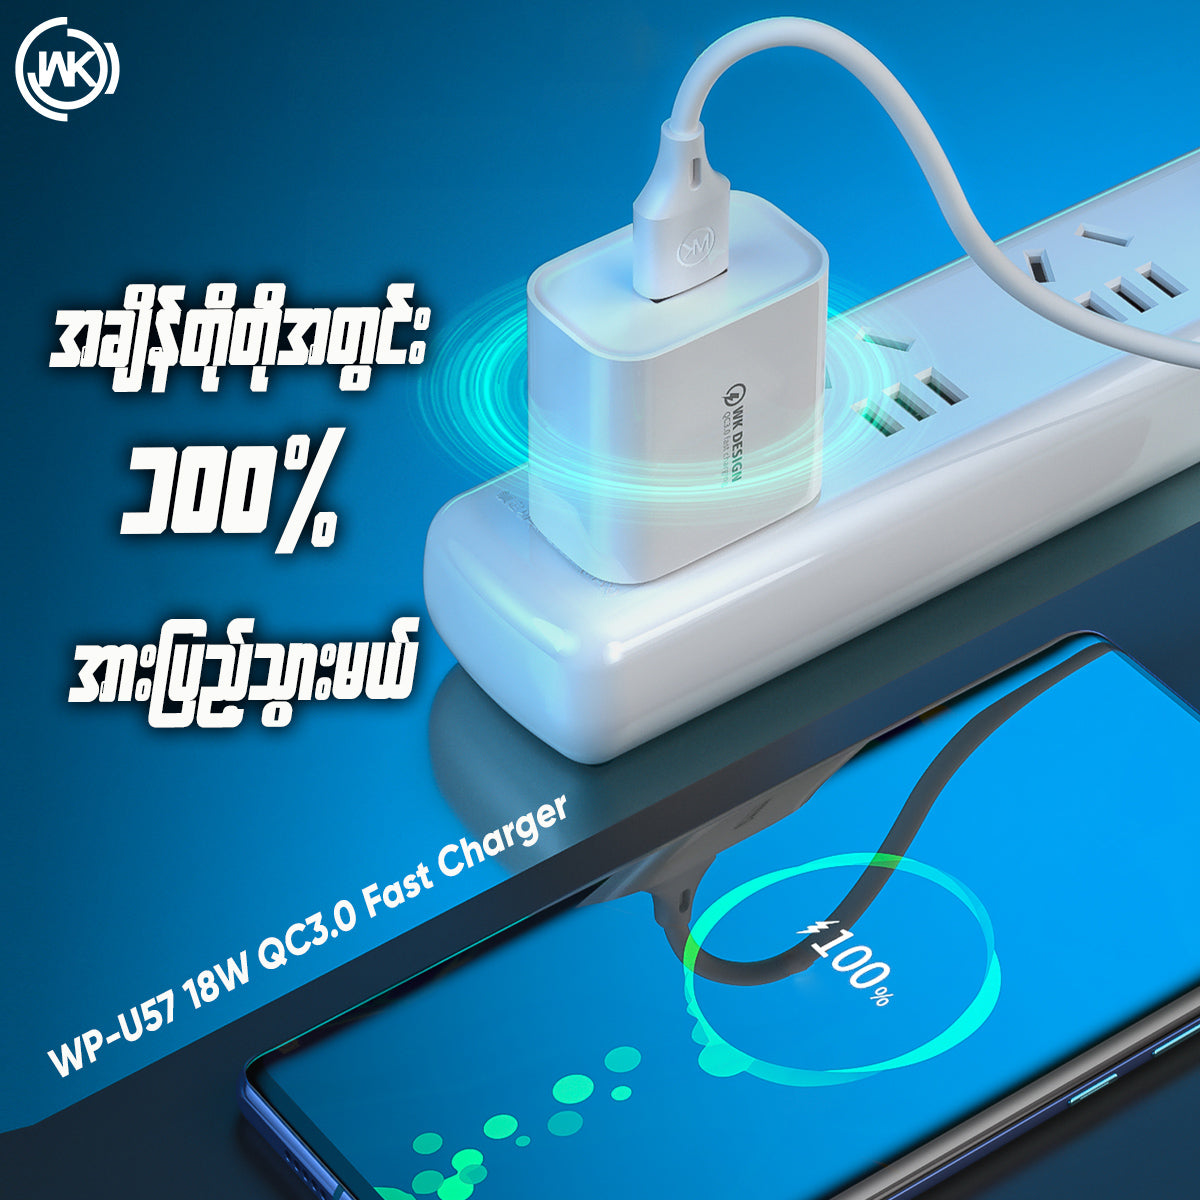 WK WP-U57 (MICRO) MAXSPEED FAST CHARGER SET WITH MICRO CABLE ,Charger , USB Phone Charger , Mobile Phone Charger , Smart Phone Charger , Andriod Phone Charger , Muti port usb charger , quick charger , cell phone charger , wall charger , Portable Charger